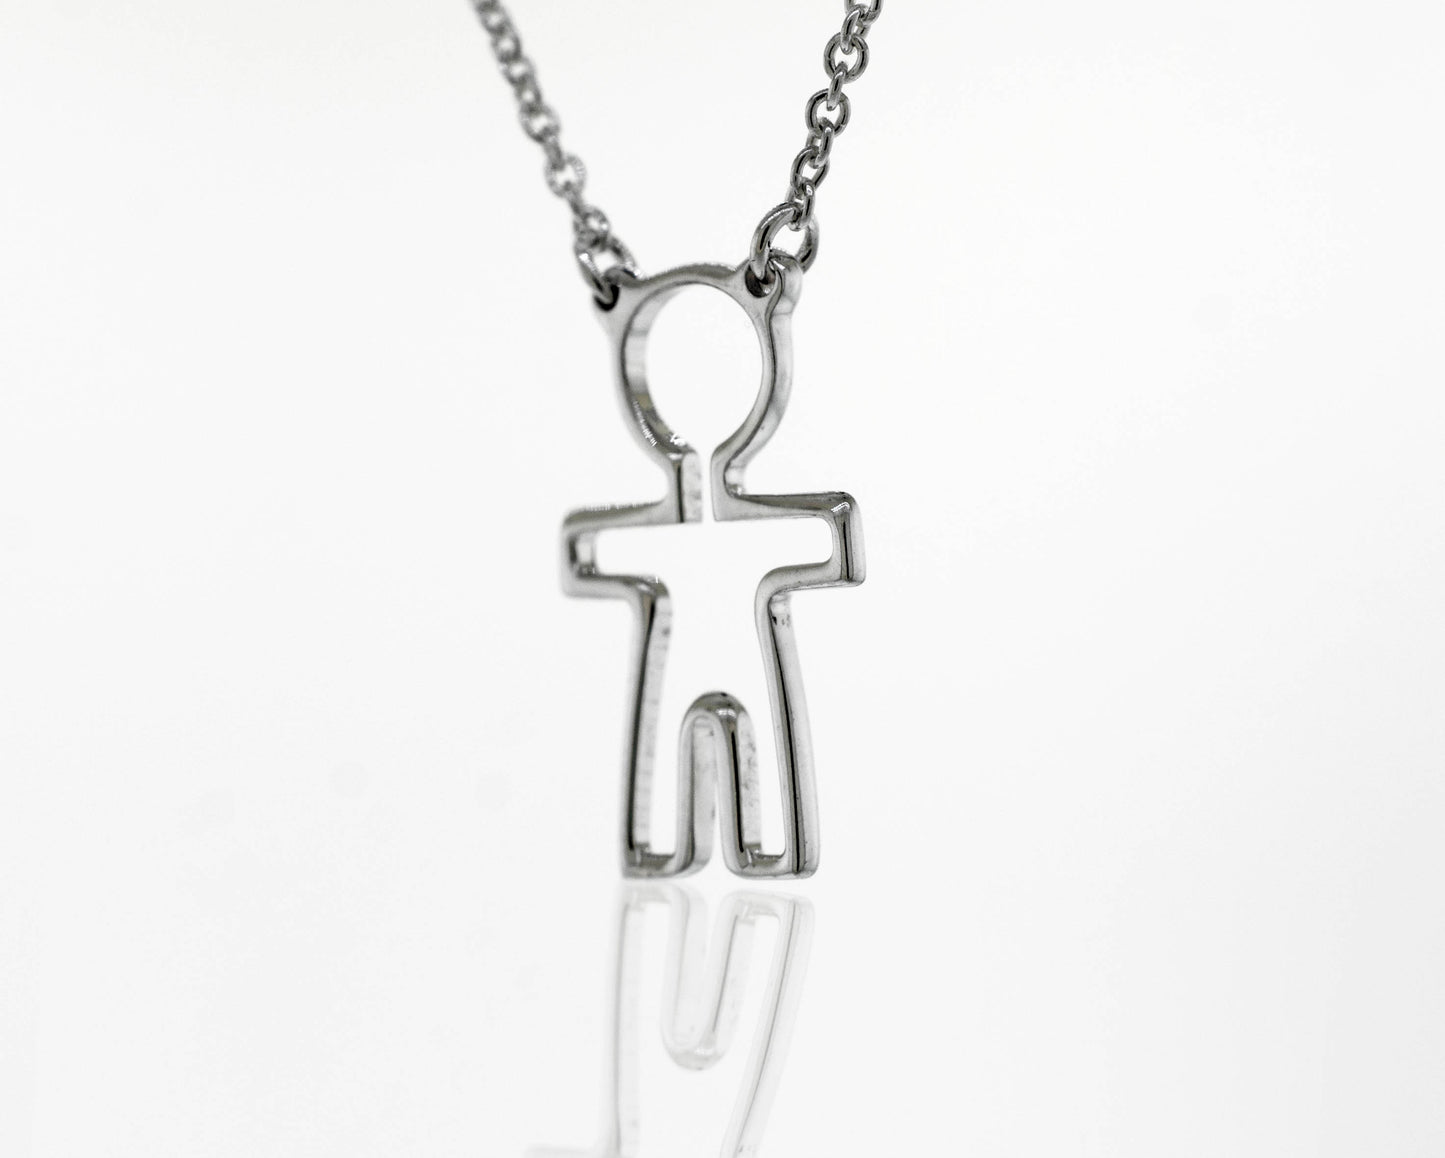 A Super Silver Little Woman Necklace adorned with a delicate figure, symbolizing love and humanity.